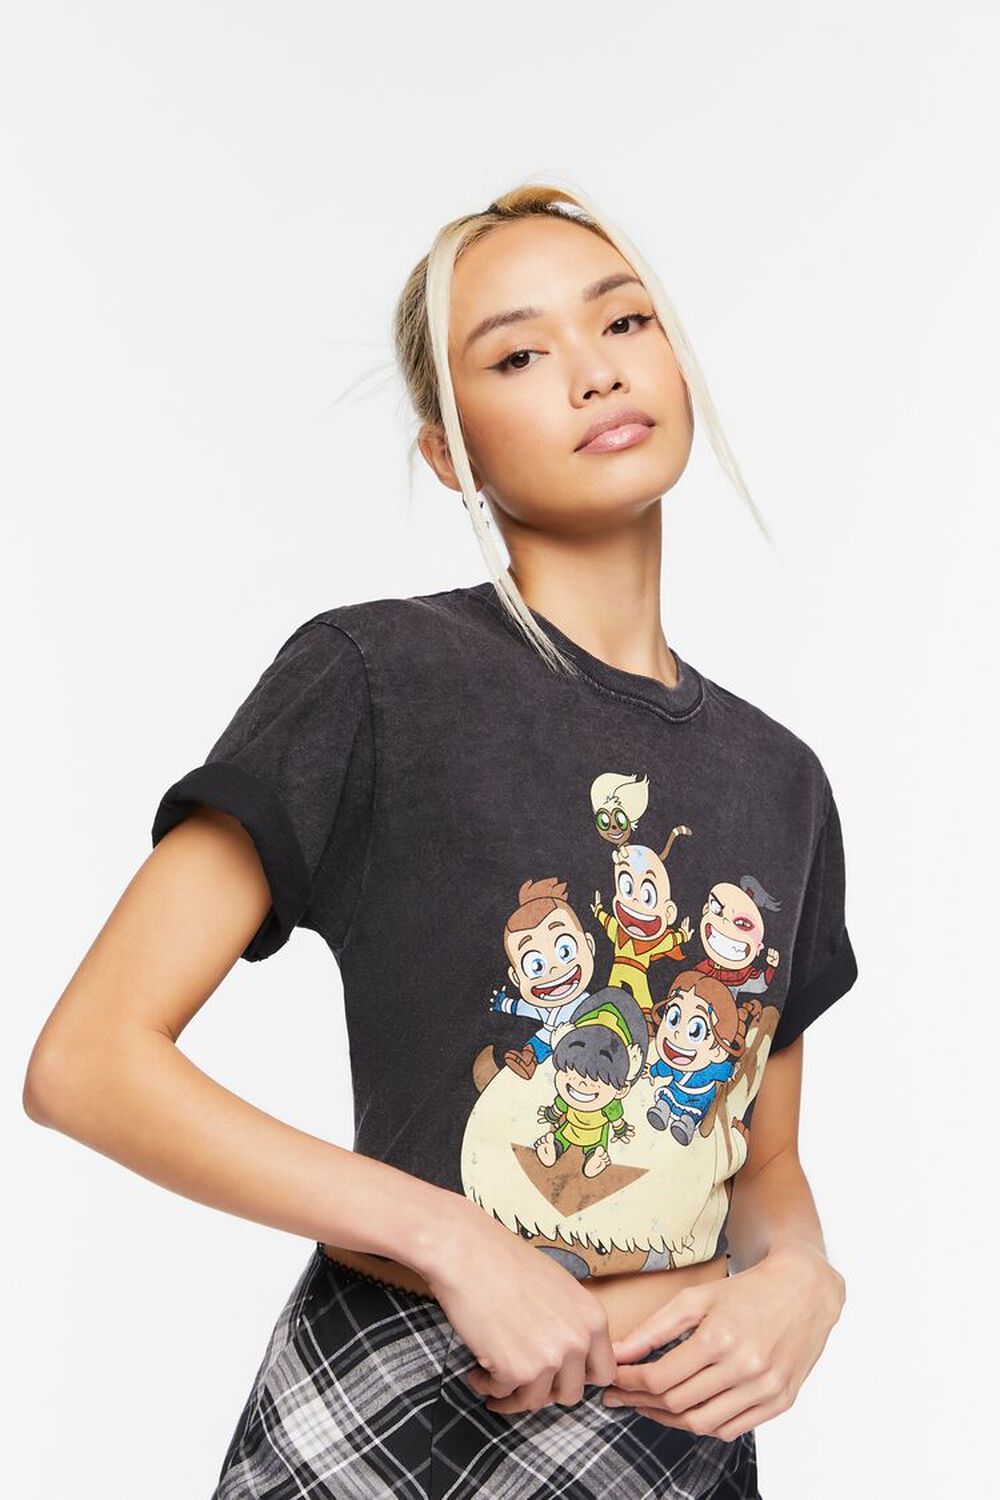 Avatar The Last Airbender Graphic Tee